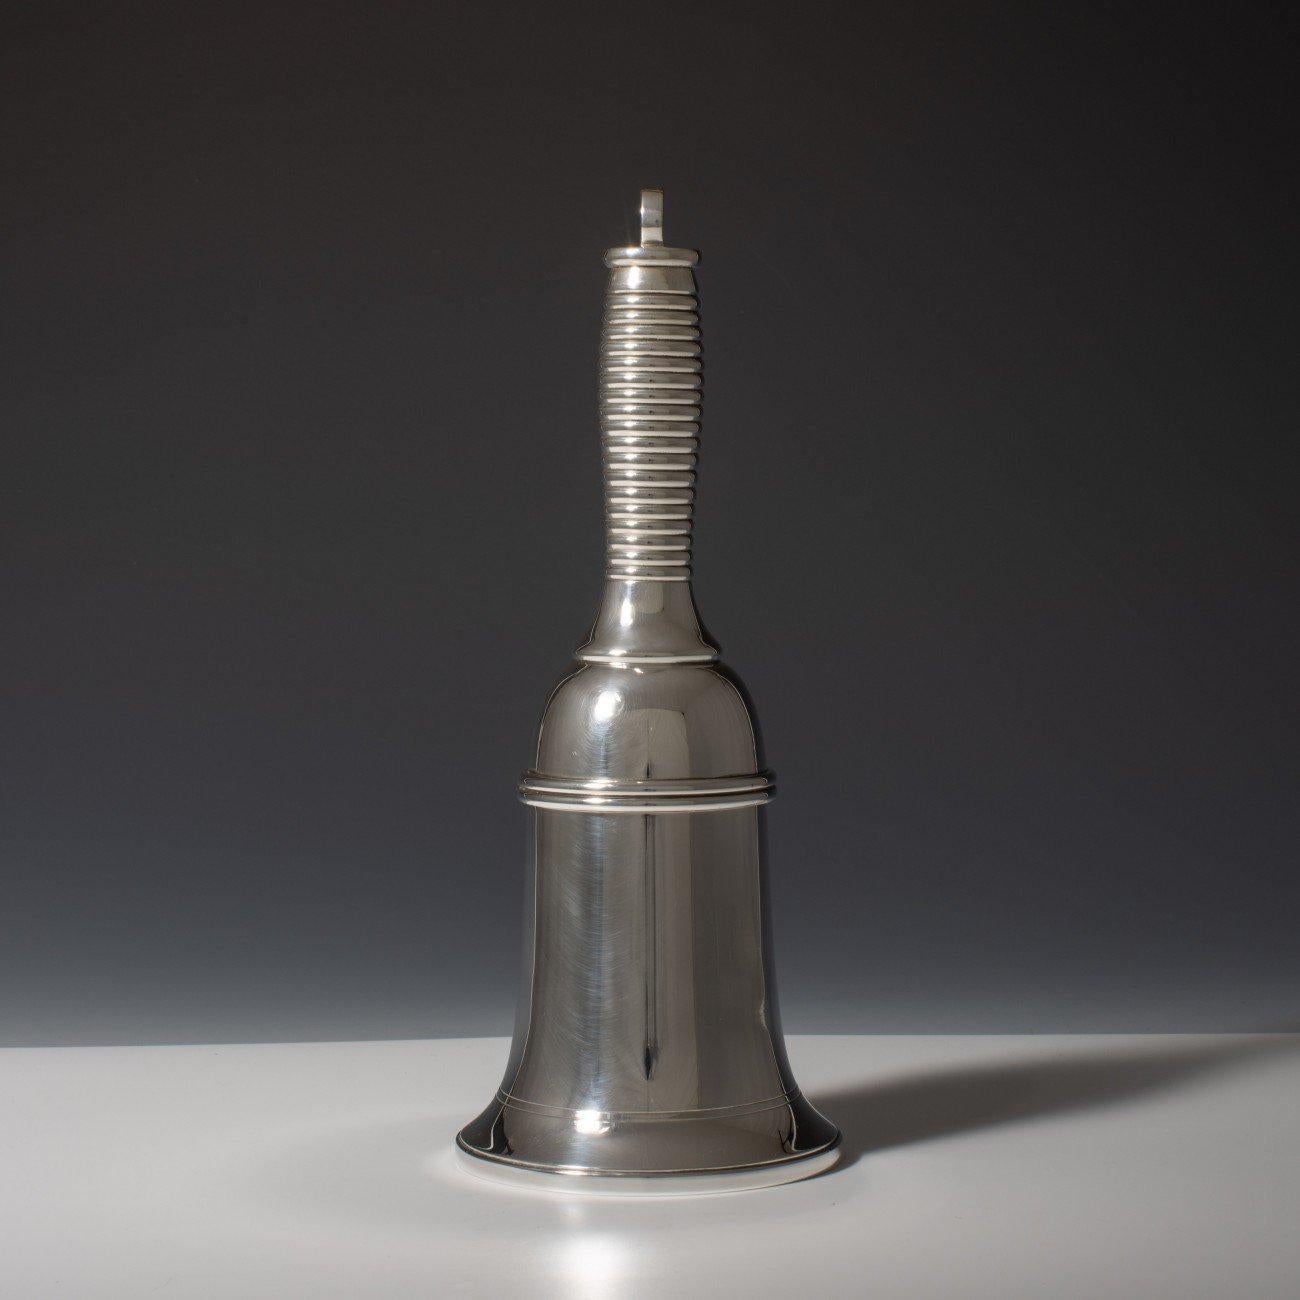 Hand Bell cocktail shaker by Italian silversmiths Fratelli Broggi. Based in Milan, Italy since the 19th century, they made ranges of silver plate for Italian ocean liners. Renowned designer and architect Gio Ponti also designed some lines for